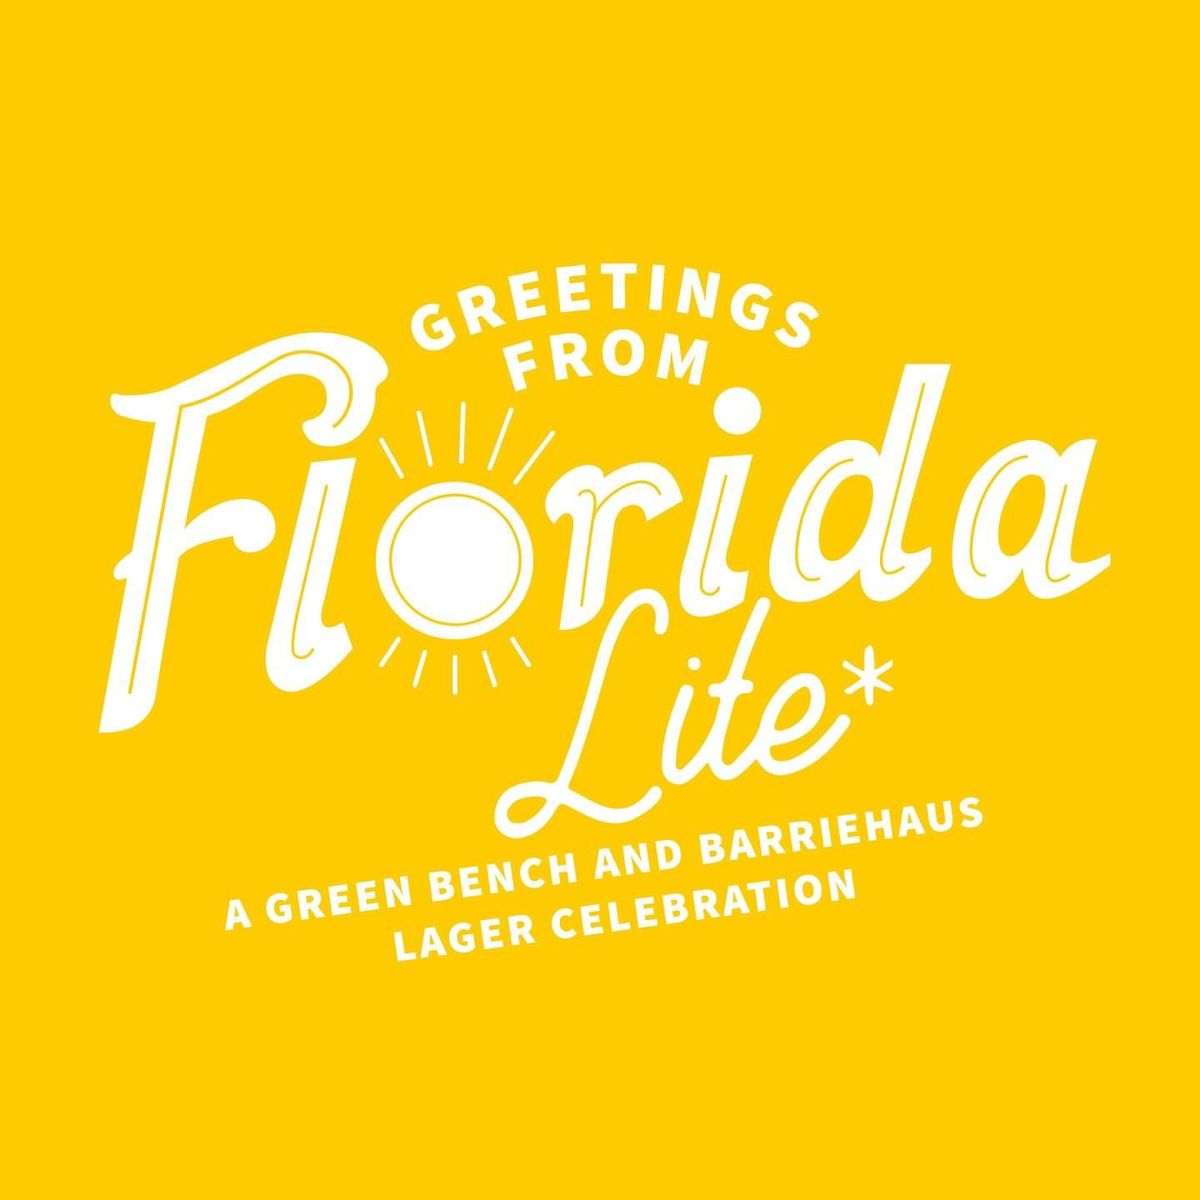 Greetings from Florida Celebration of Lagers Lite*